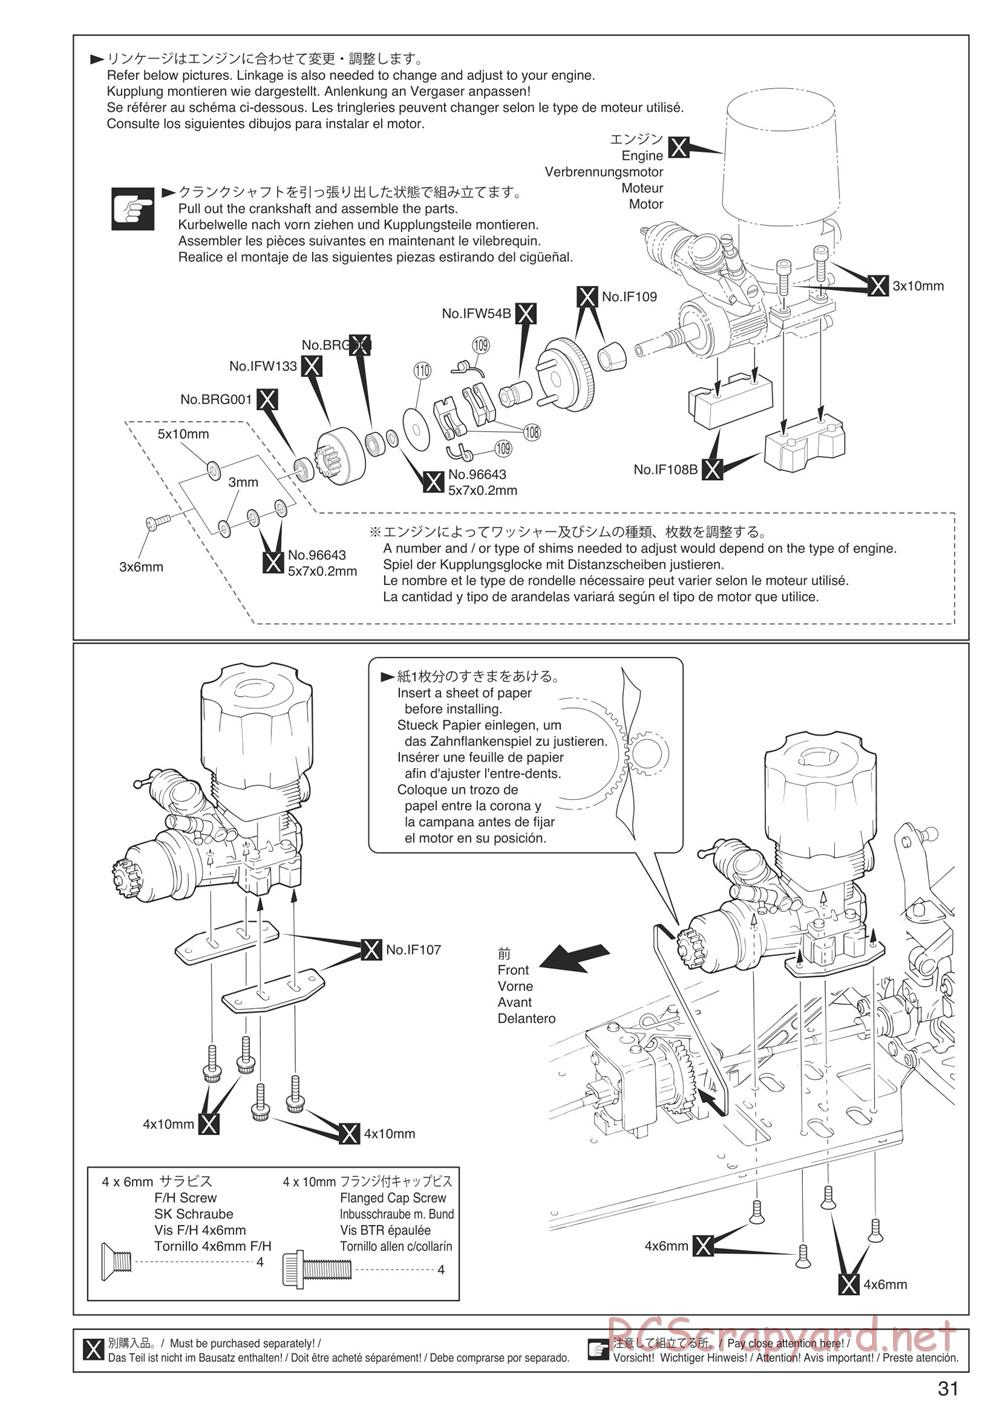 Kyosho - Inferno Neo - Manual - Page 31